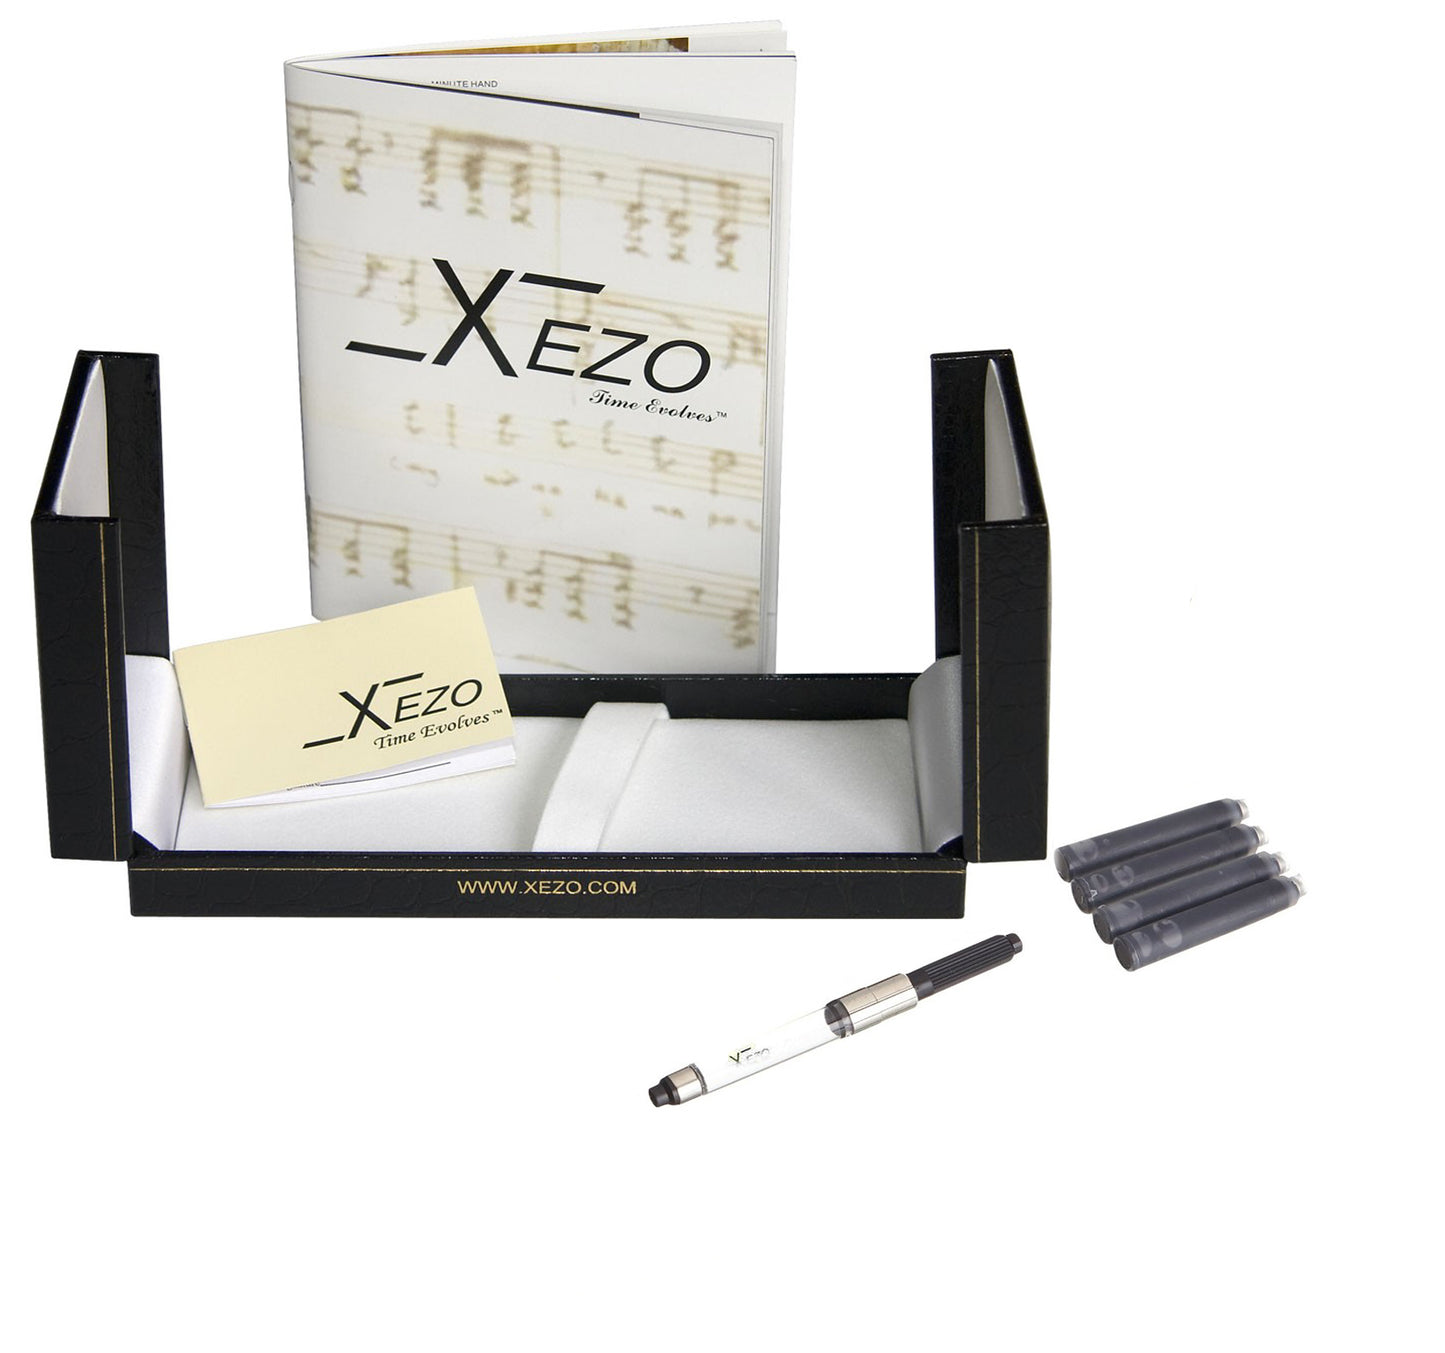 Xezo - Black gift box, certificate, manual, chrome plated ink converter, and four ink cartridges of the Incognito Burgundy FM fountain pen